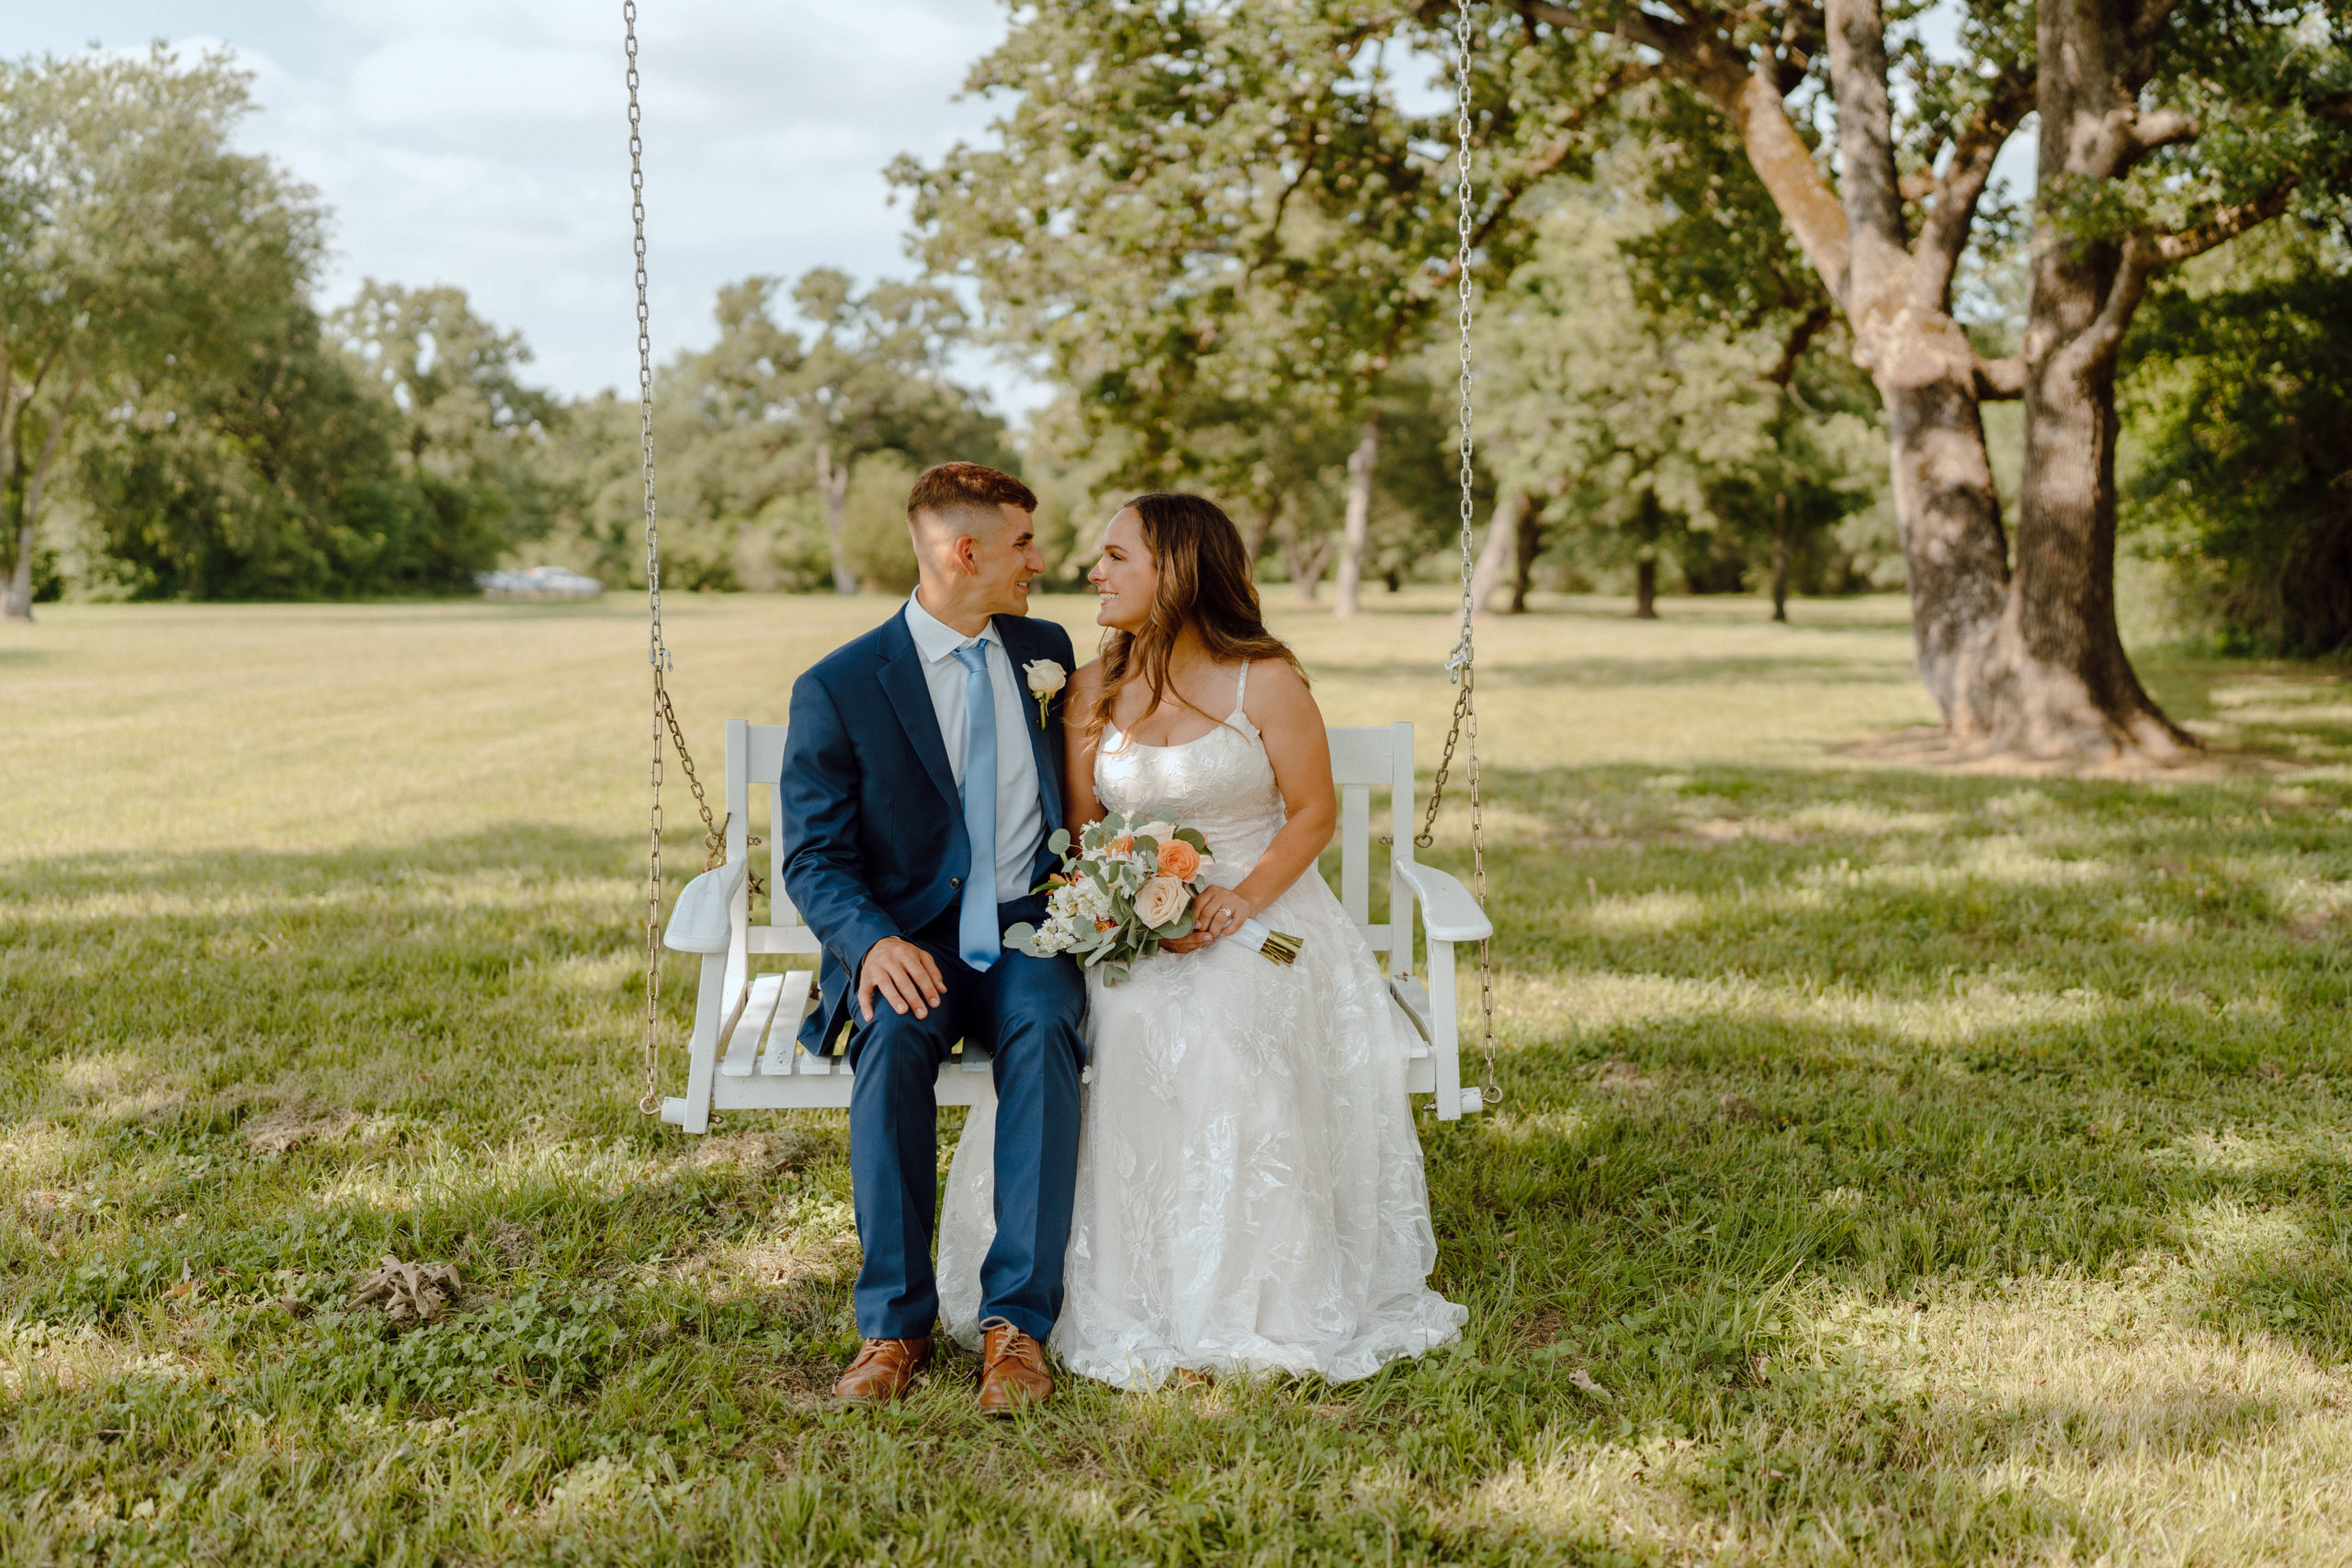 This timeless backyard wedding took place in the gorgeous Texas hill country. While the stunning venue held well over 200 guests, this beautiful Texas wedding had the charm and feel of an intimate backyard wedding. Each photo is full to the brim with candid storytelling in an editorial style. Angelina Loreta Photography created timeless wedding photos for the Austin couple.